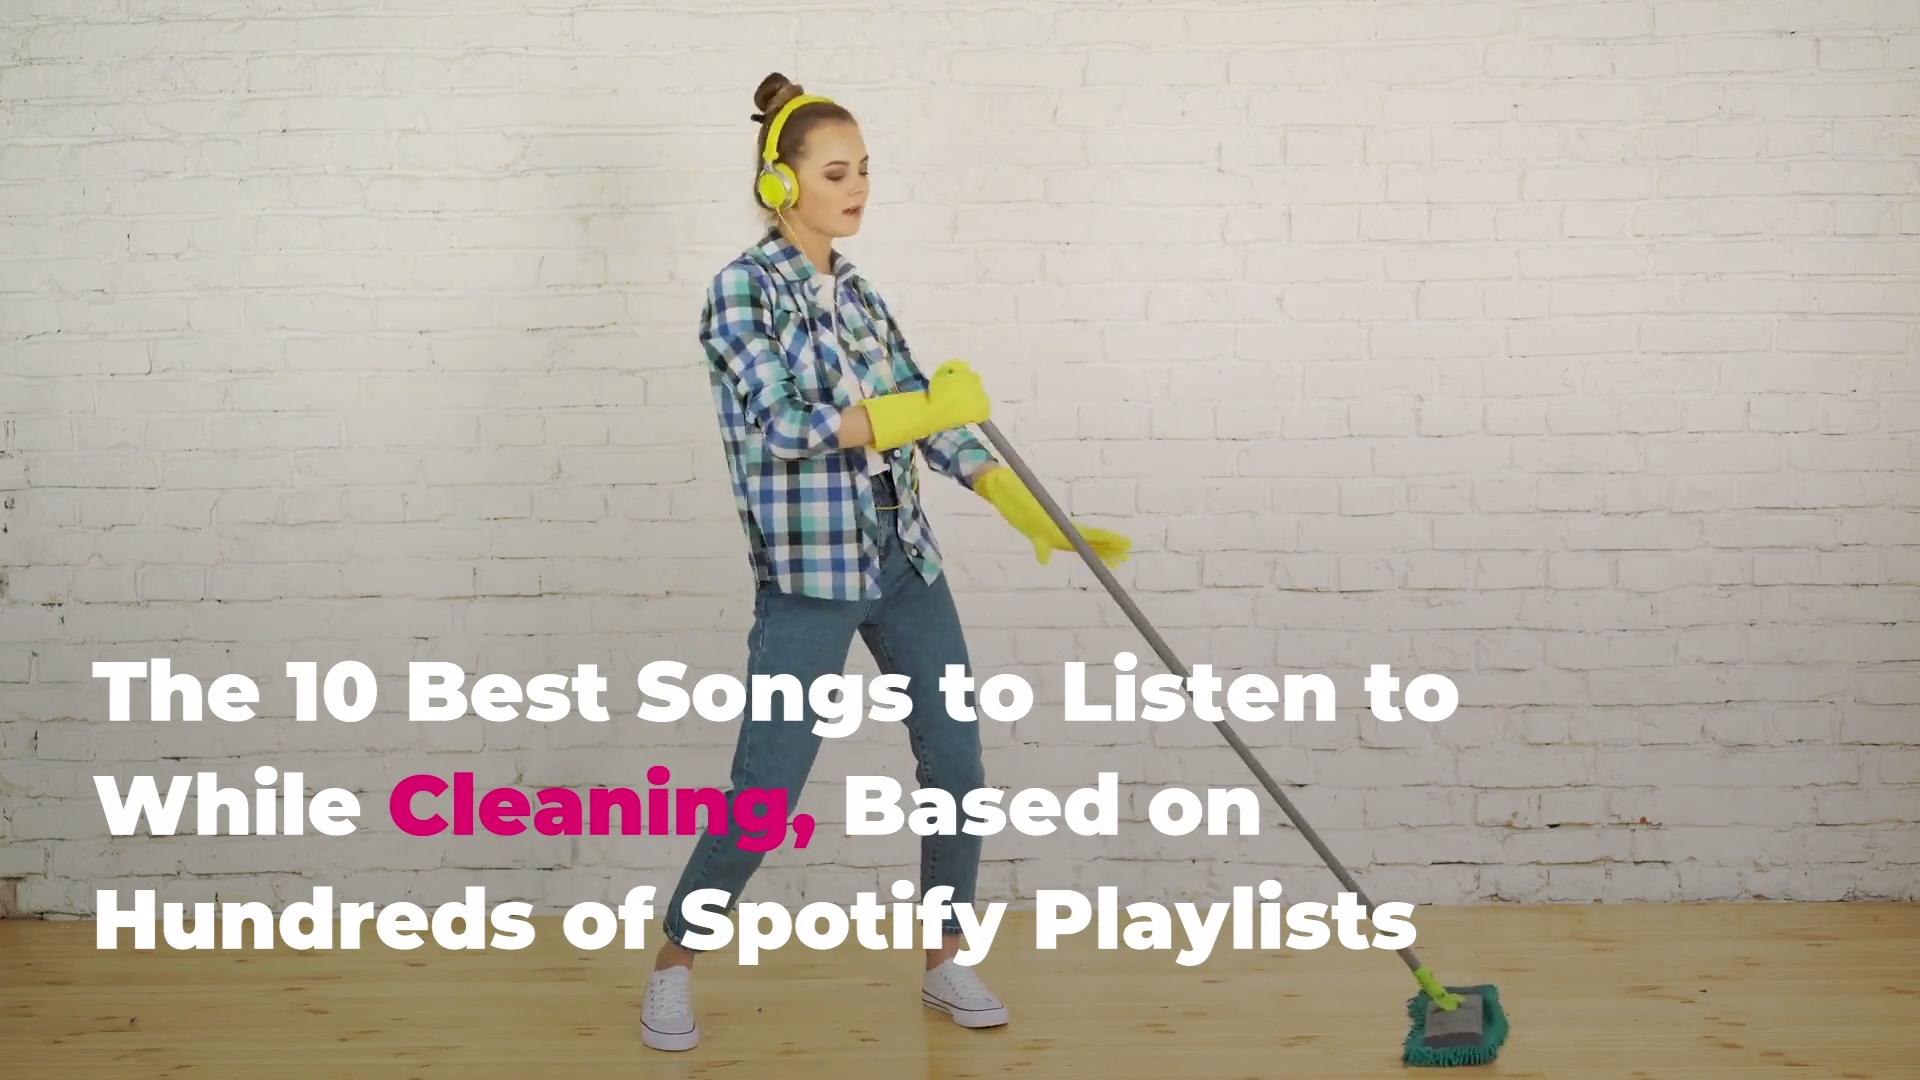 The 10 Best Songs to Listen to While Cleaning, Based on Hundreds of Spotify Playlists